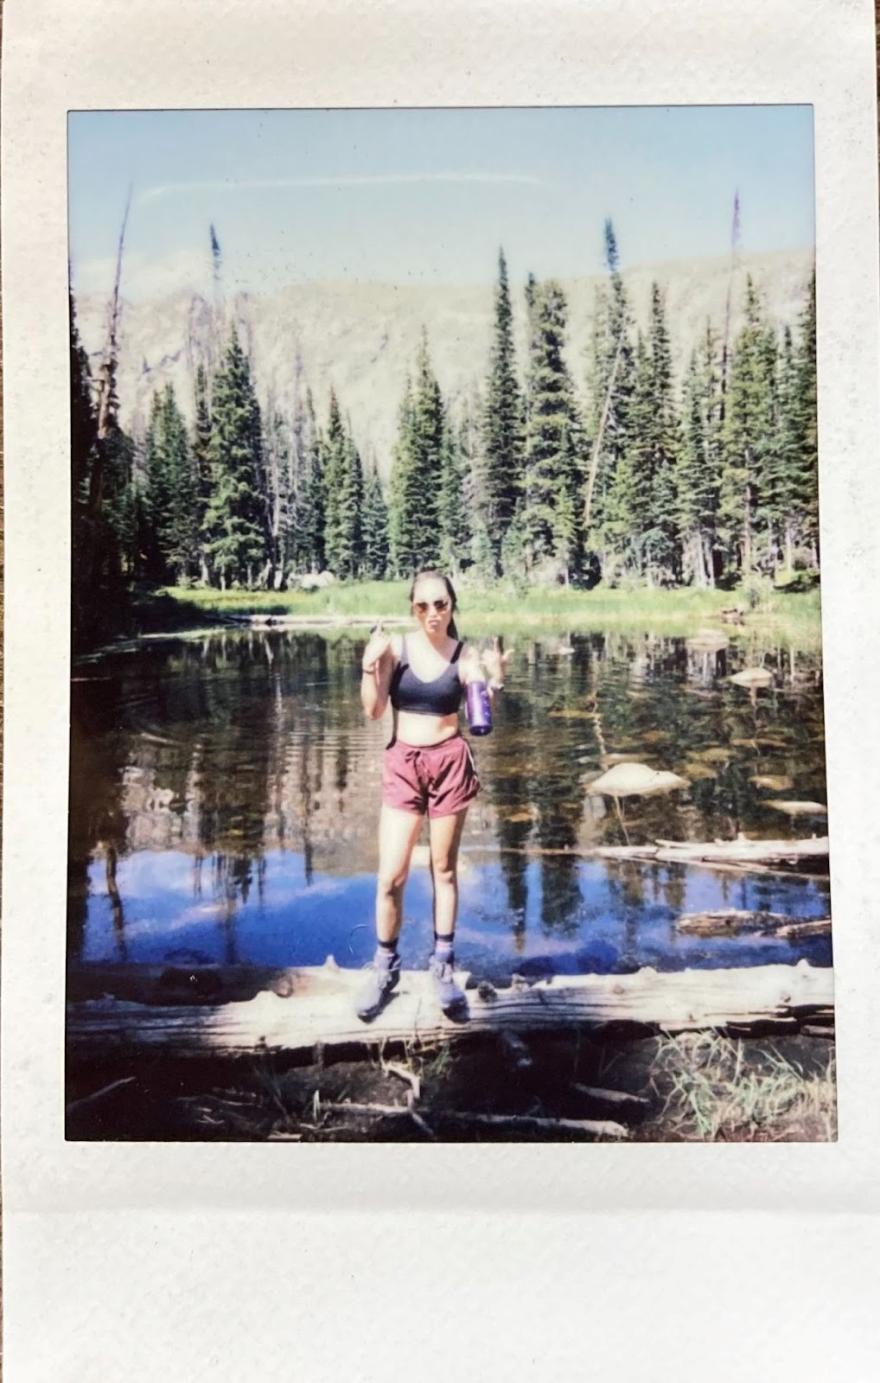 Bethany Spencer in a polaroid style photo posing at a lake with trees in the background, presumably after a hike. 